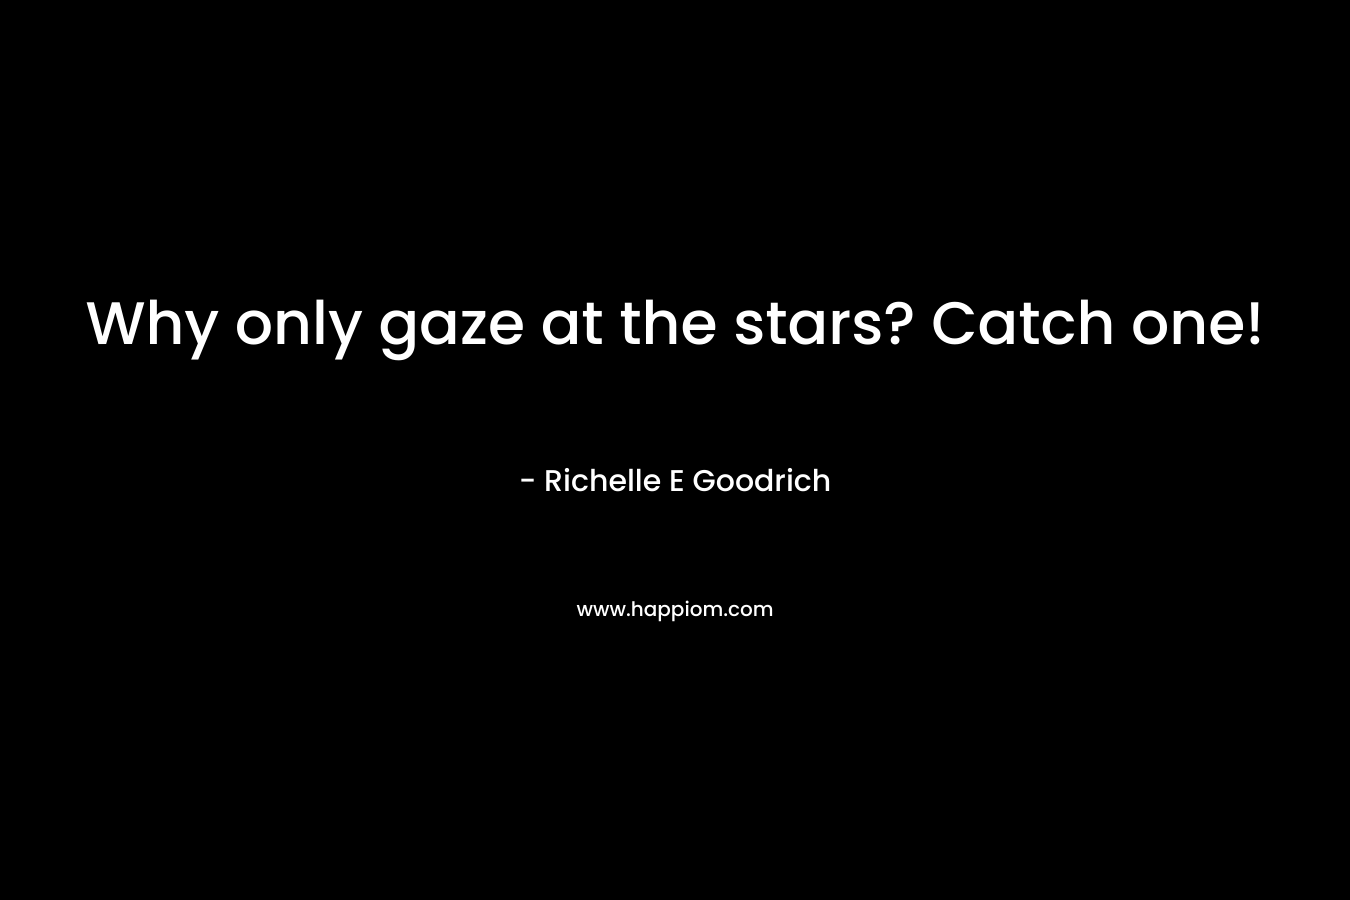 Why only gaze at the stars? Catch one!